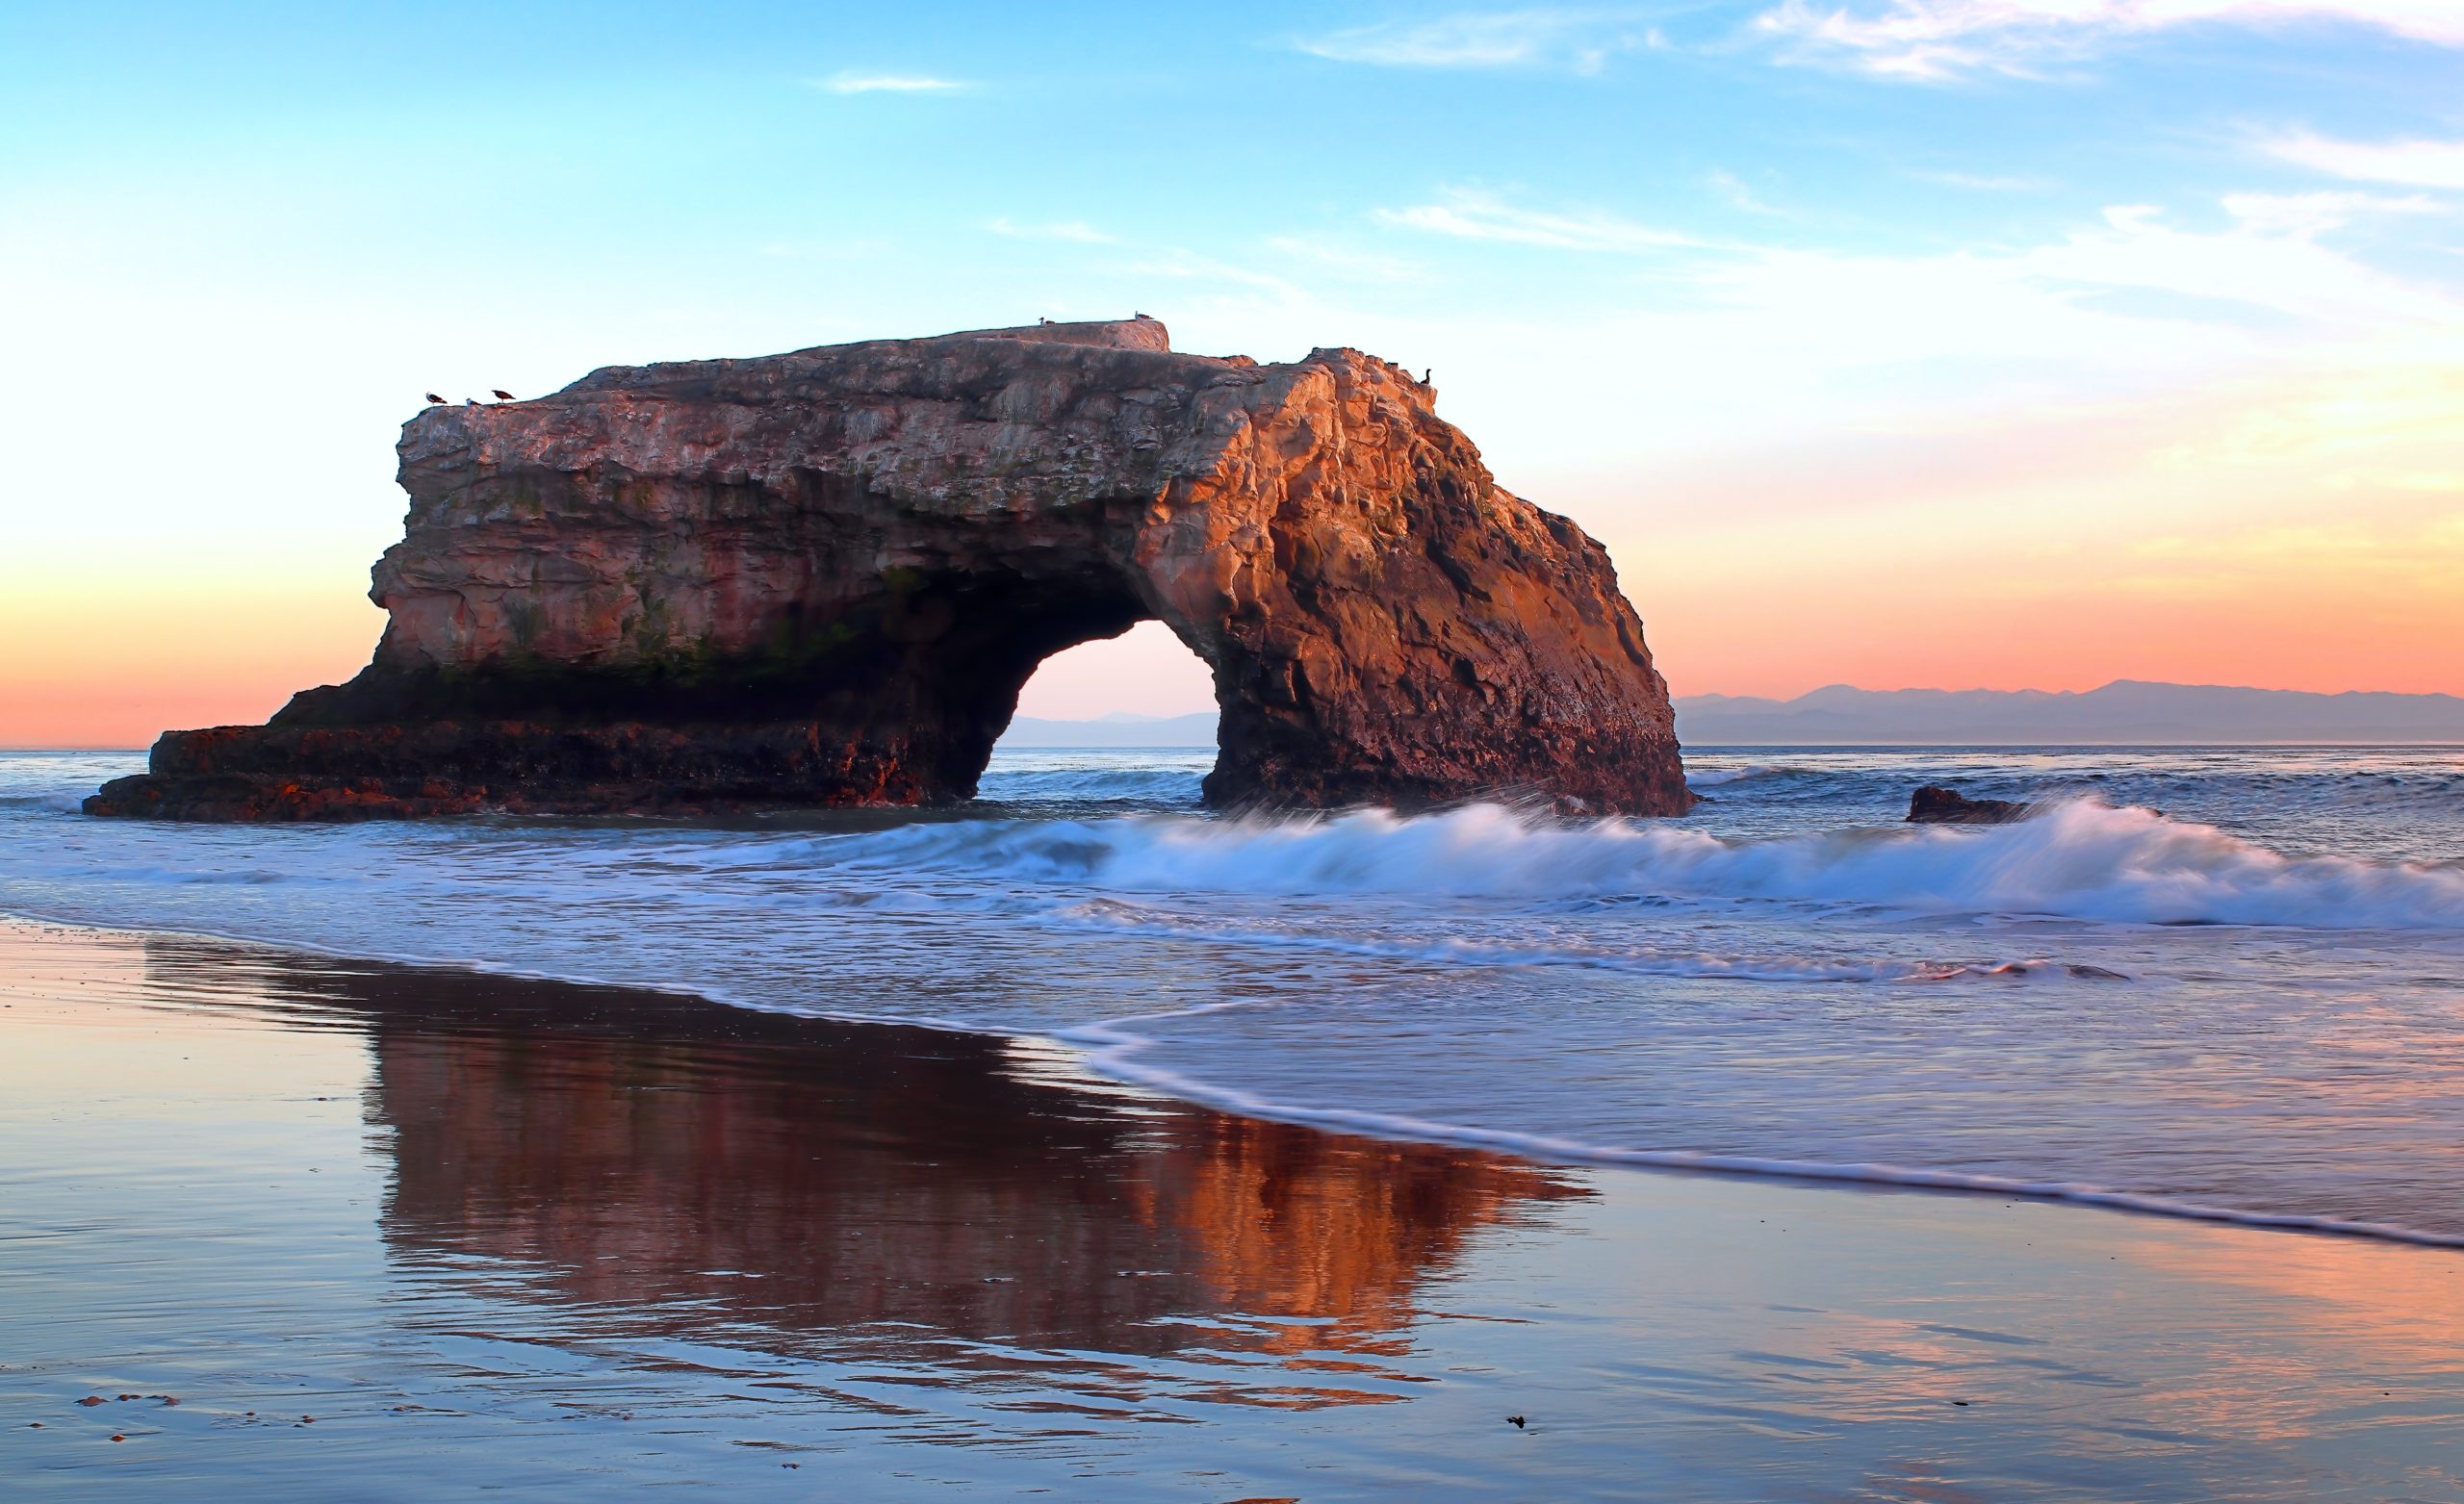 Natural Bridges State Beach (Santa Cruz) at sunset. In the medium distance, it shows a large, naturally occurring mudstone bridge carved by the Pacific Ocean into a cliff jutting out into the sea. A small wave is breaking as it approaches the sandy beach, which reflects the sunset in a thin layer of water. Photo courtesy of Simon Hurry, published on January 29, 2022, free to use under the Unsplash License.